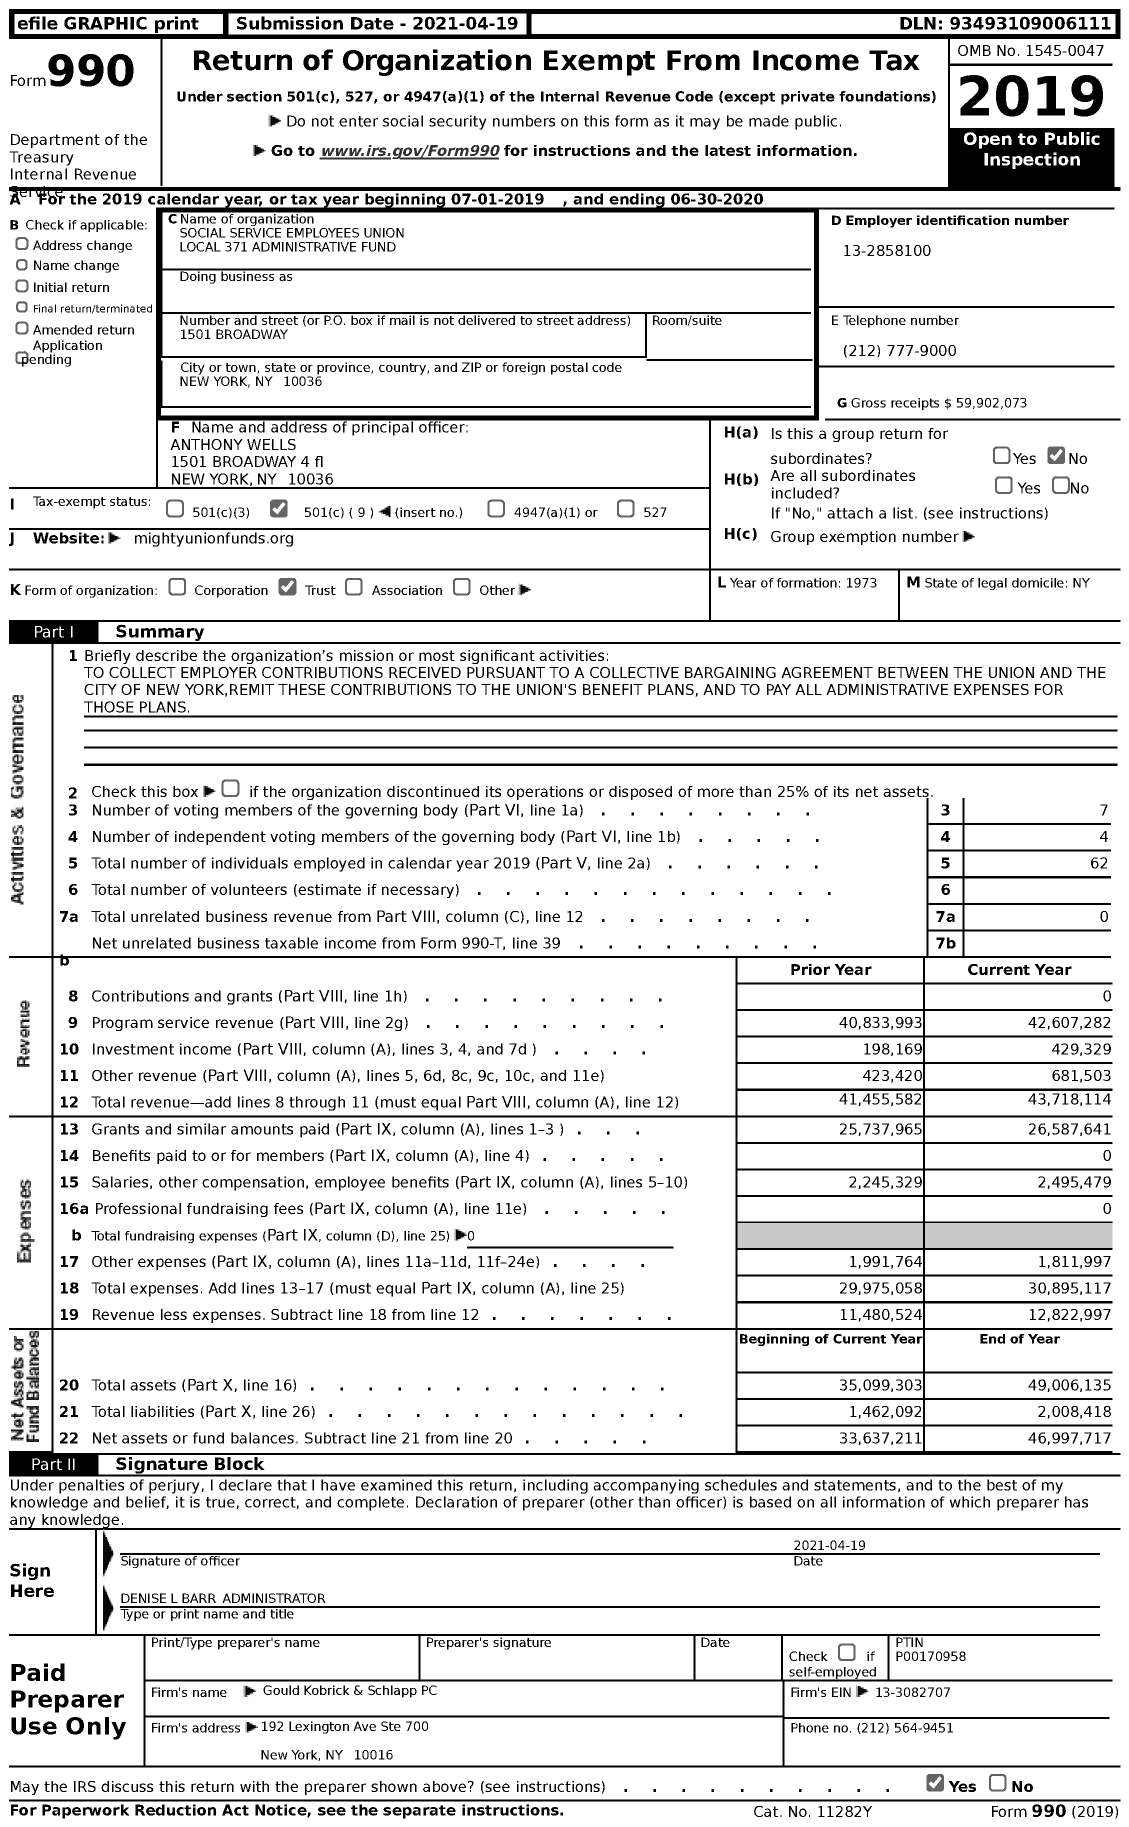 Image of first page of 2019 Form 990 for Social Service Employees Union Local 371 Administrative Fund